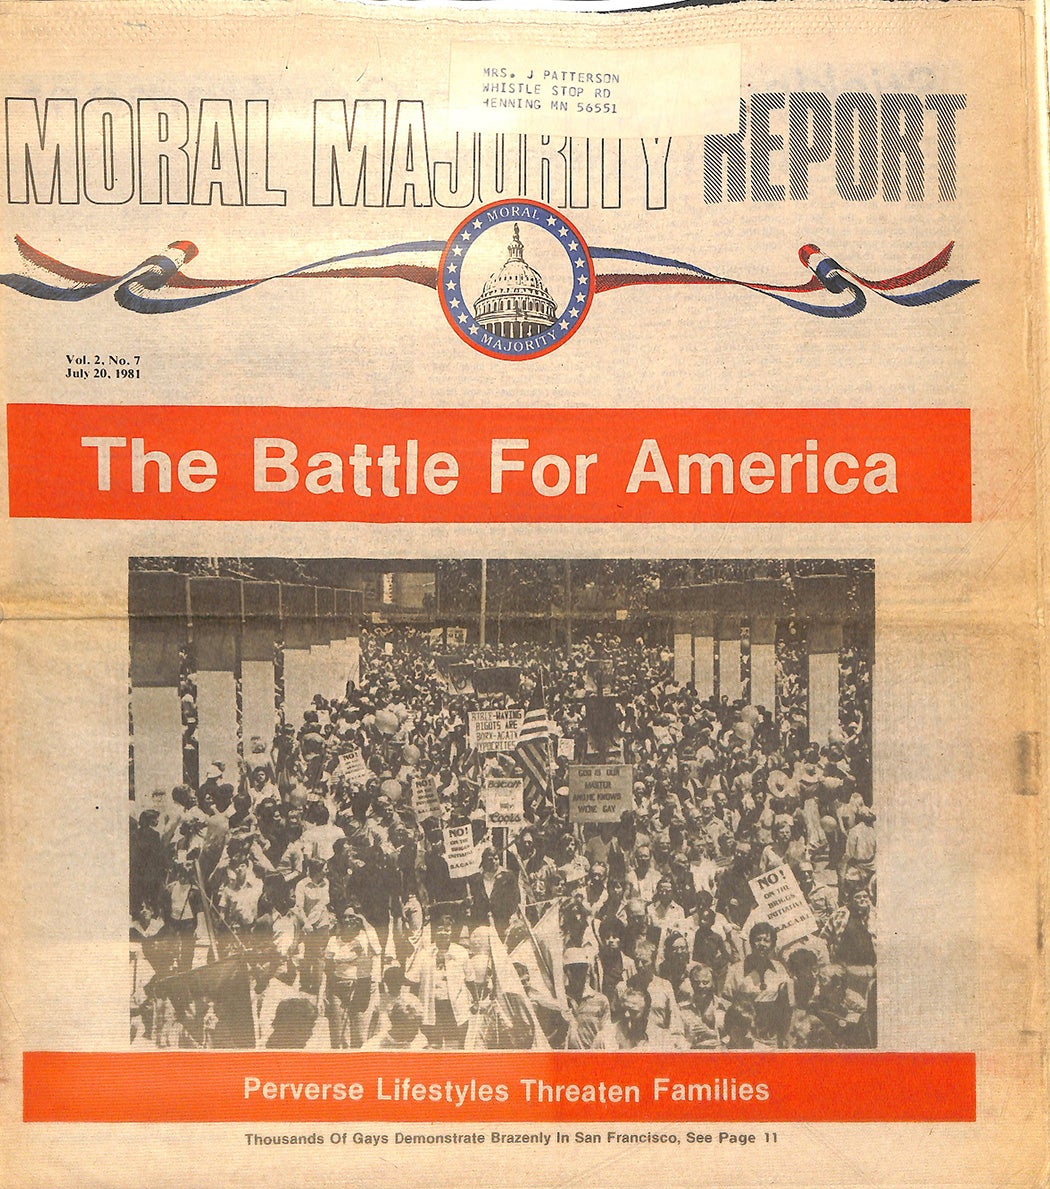 The Moral Majority Report July 1981